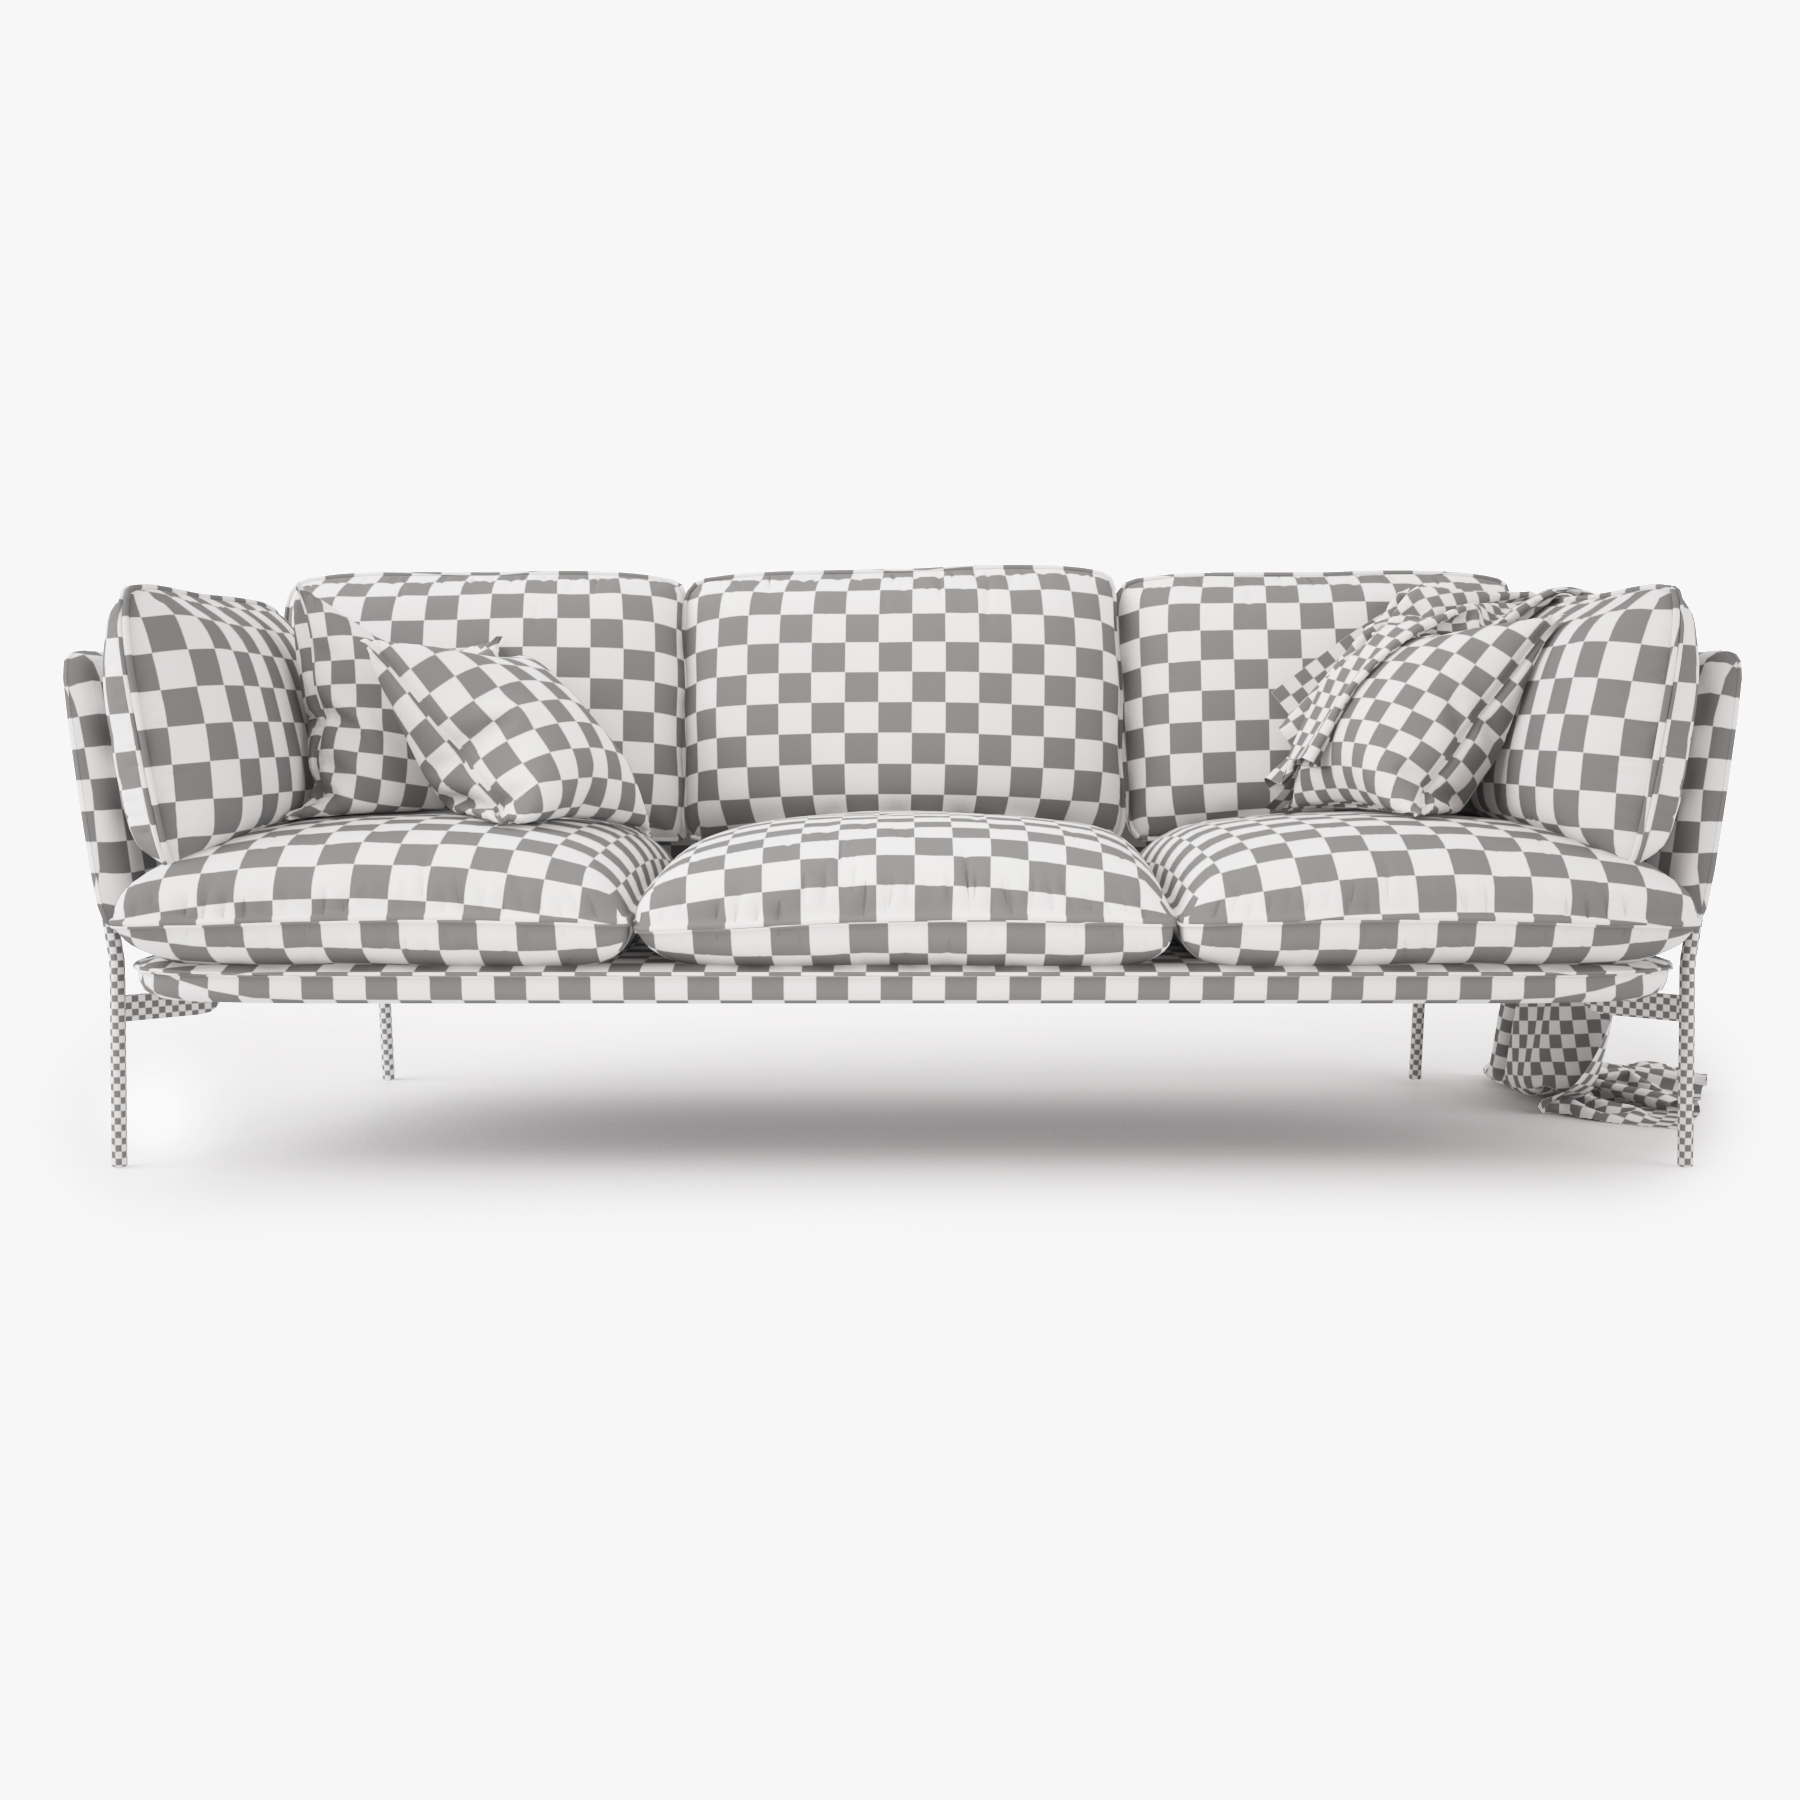 tradition cloud seater sofa 3d max